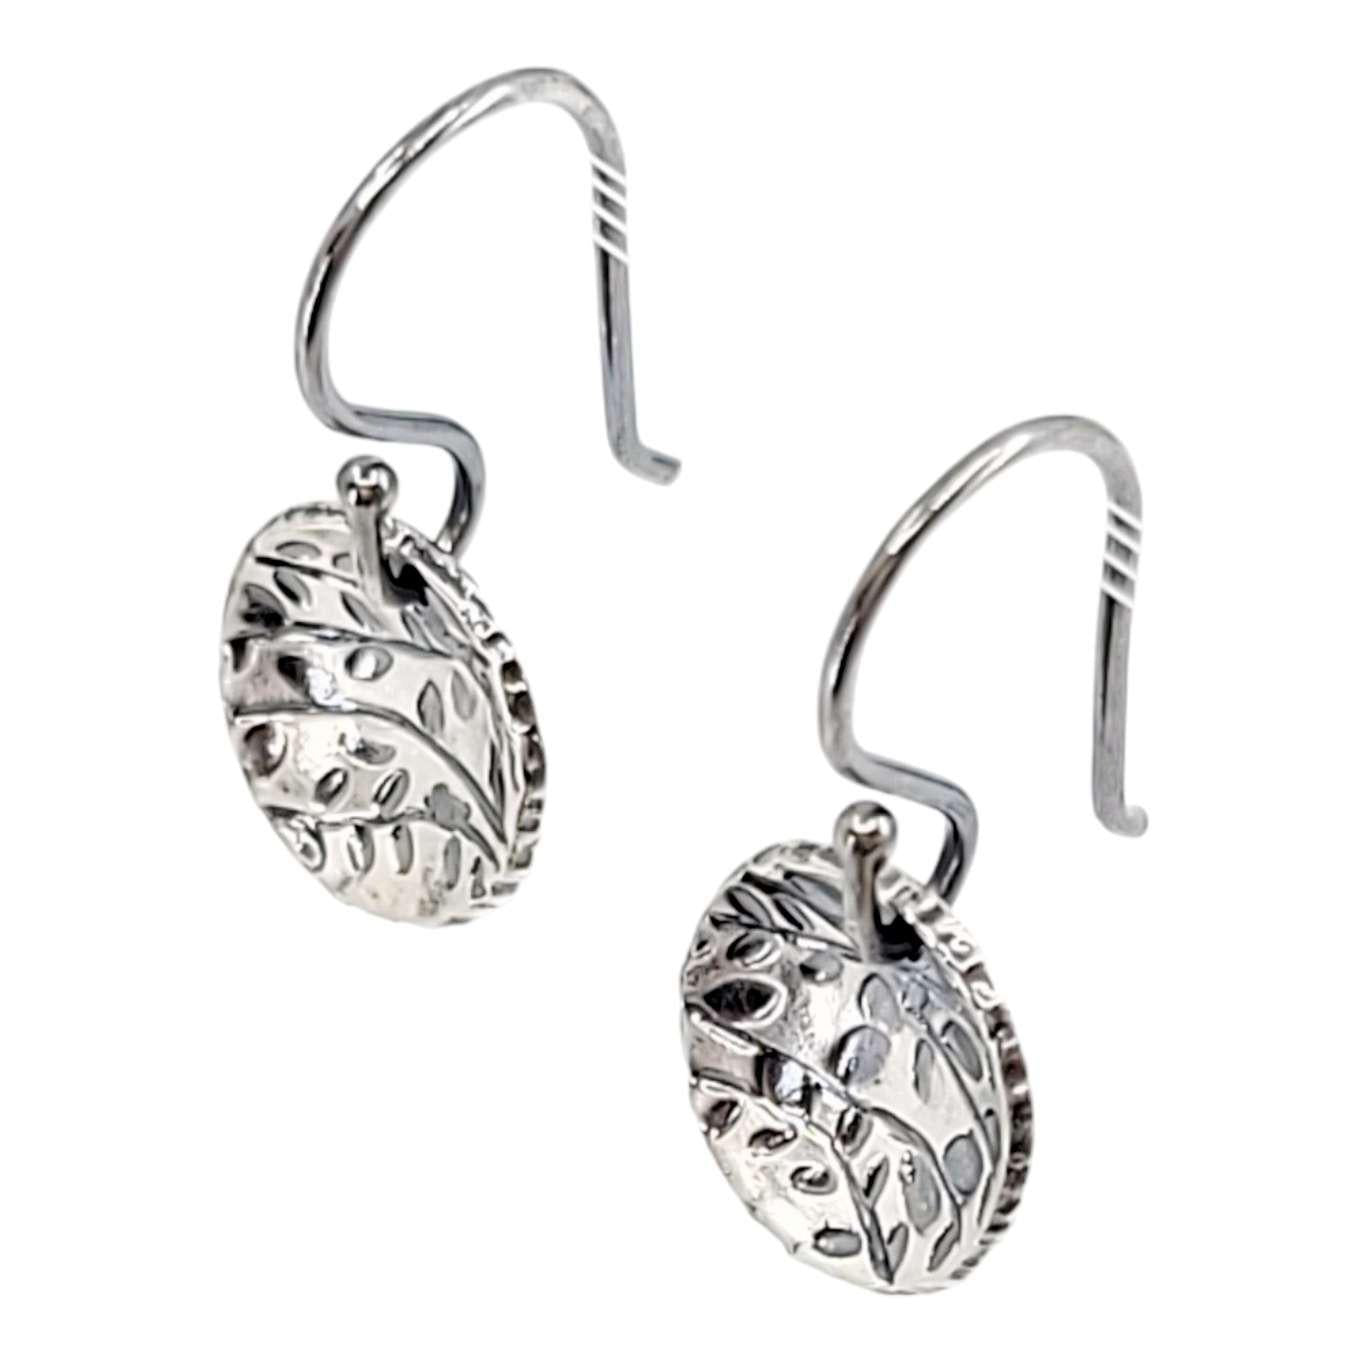 Earrings - Round Small Vine Echoes Dangles by Taviametal